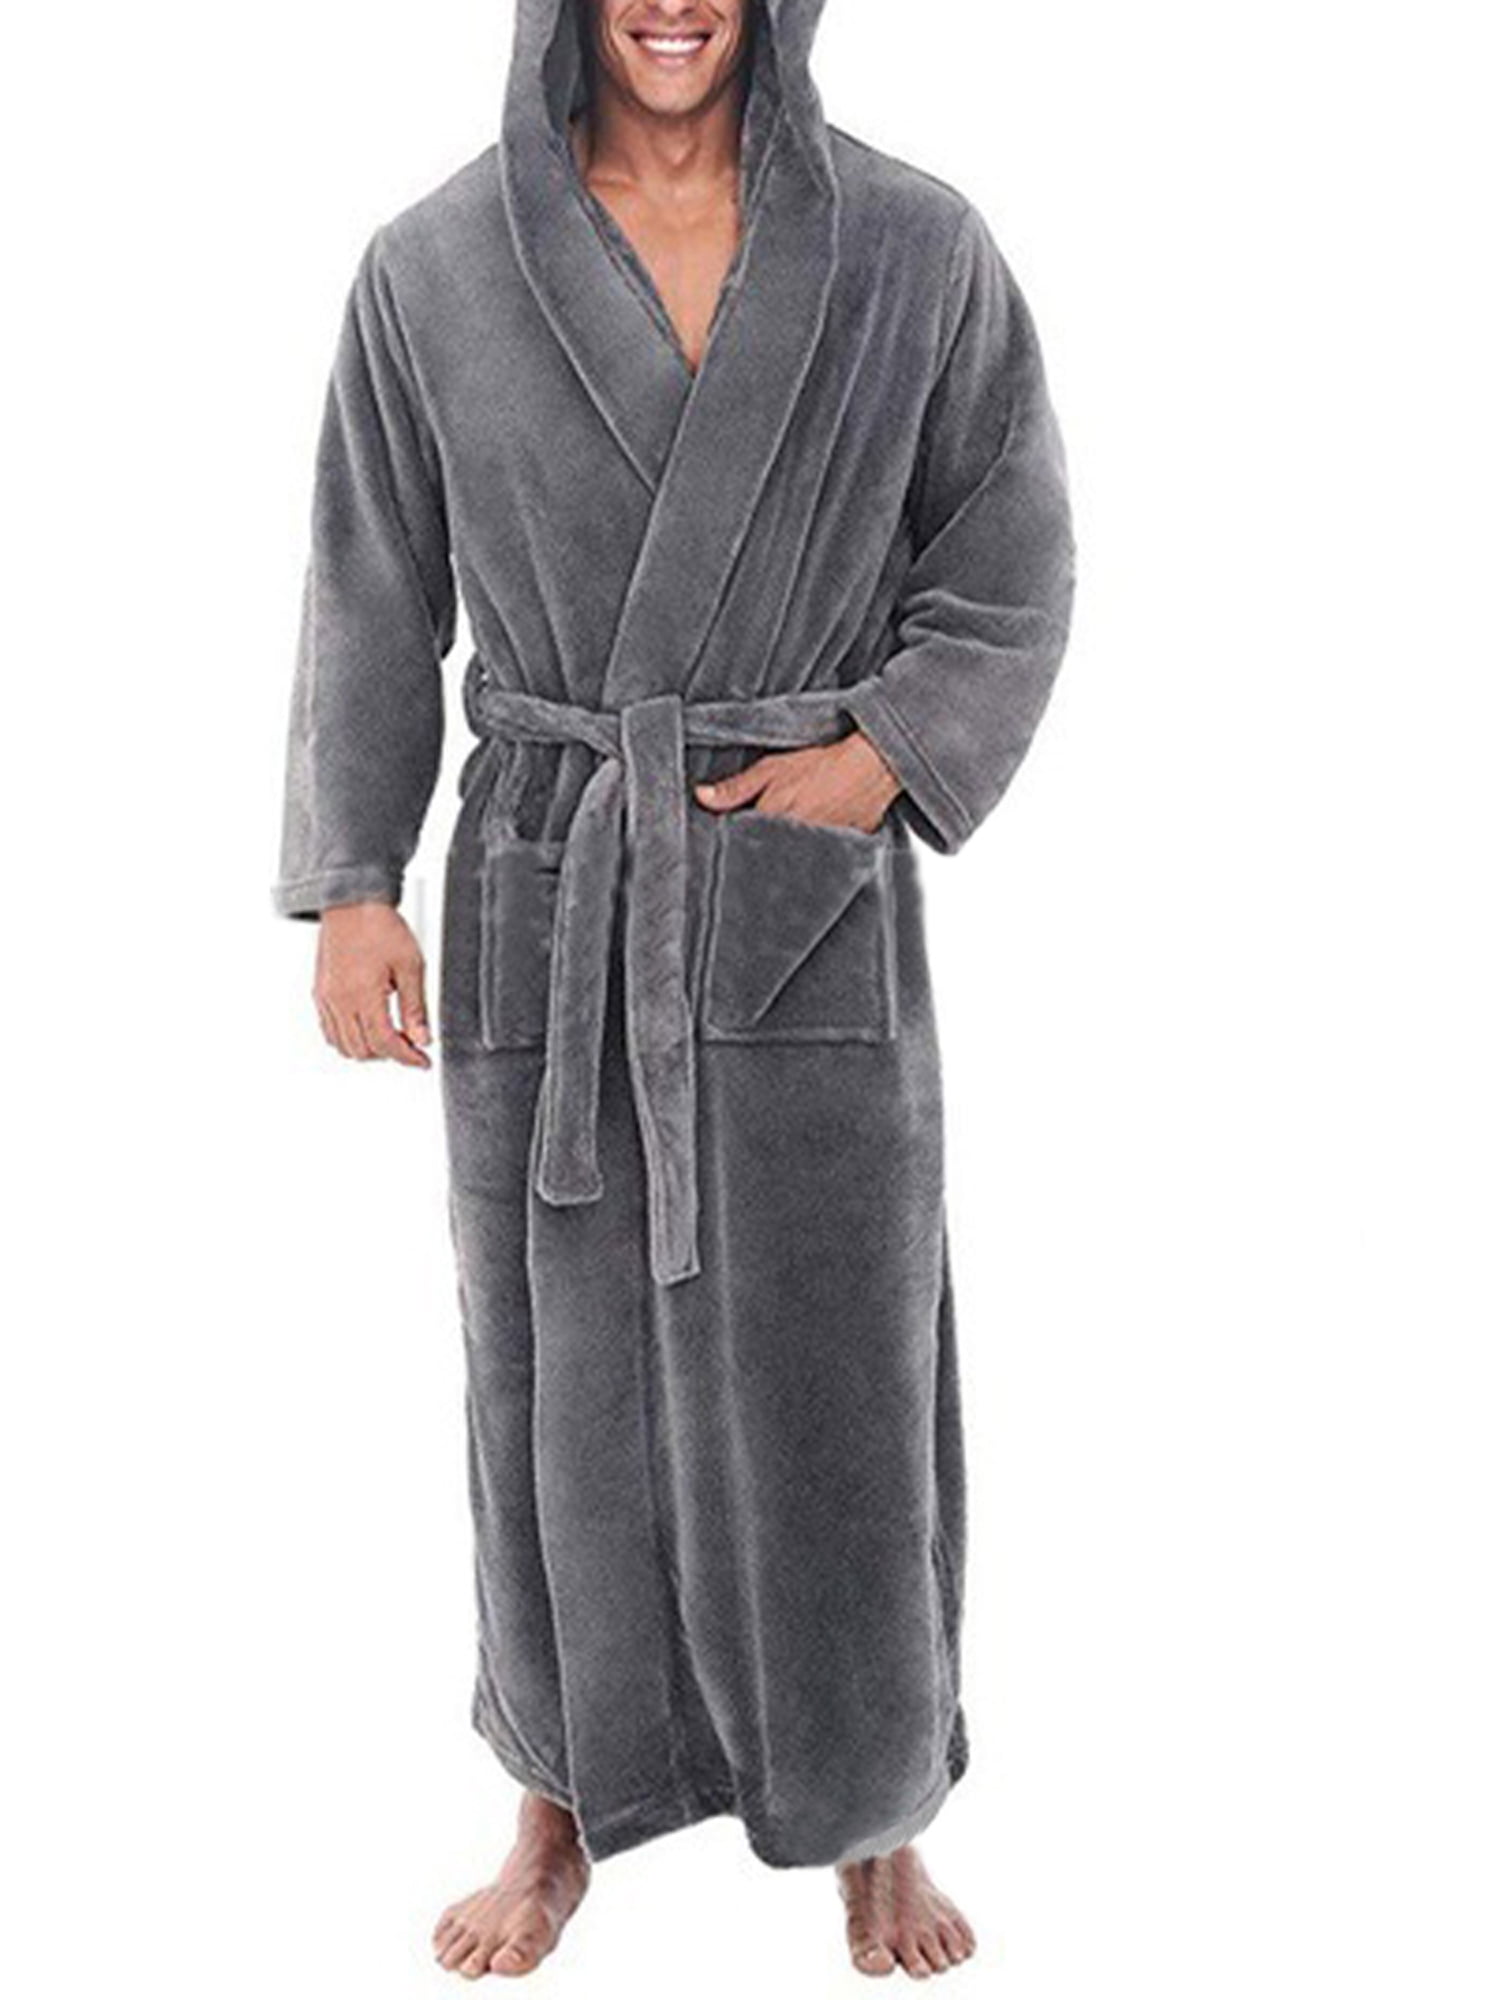 MENS HOODED TOWELLING COTTON ROBE DRESSING GOWN BATHROBE GIFT SIZE M/XL NEW 